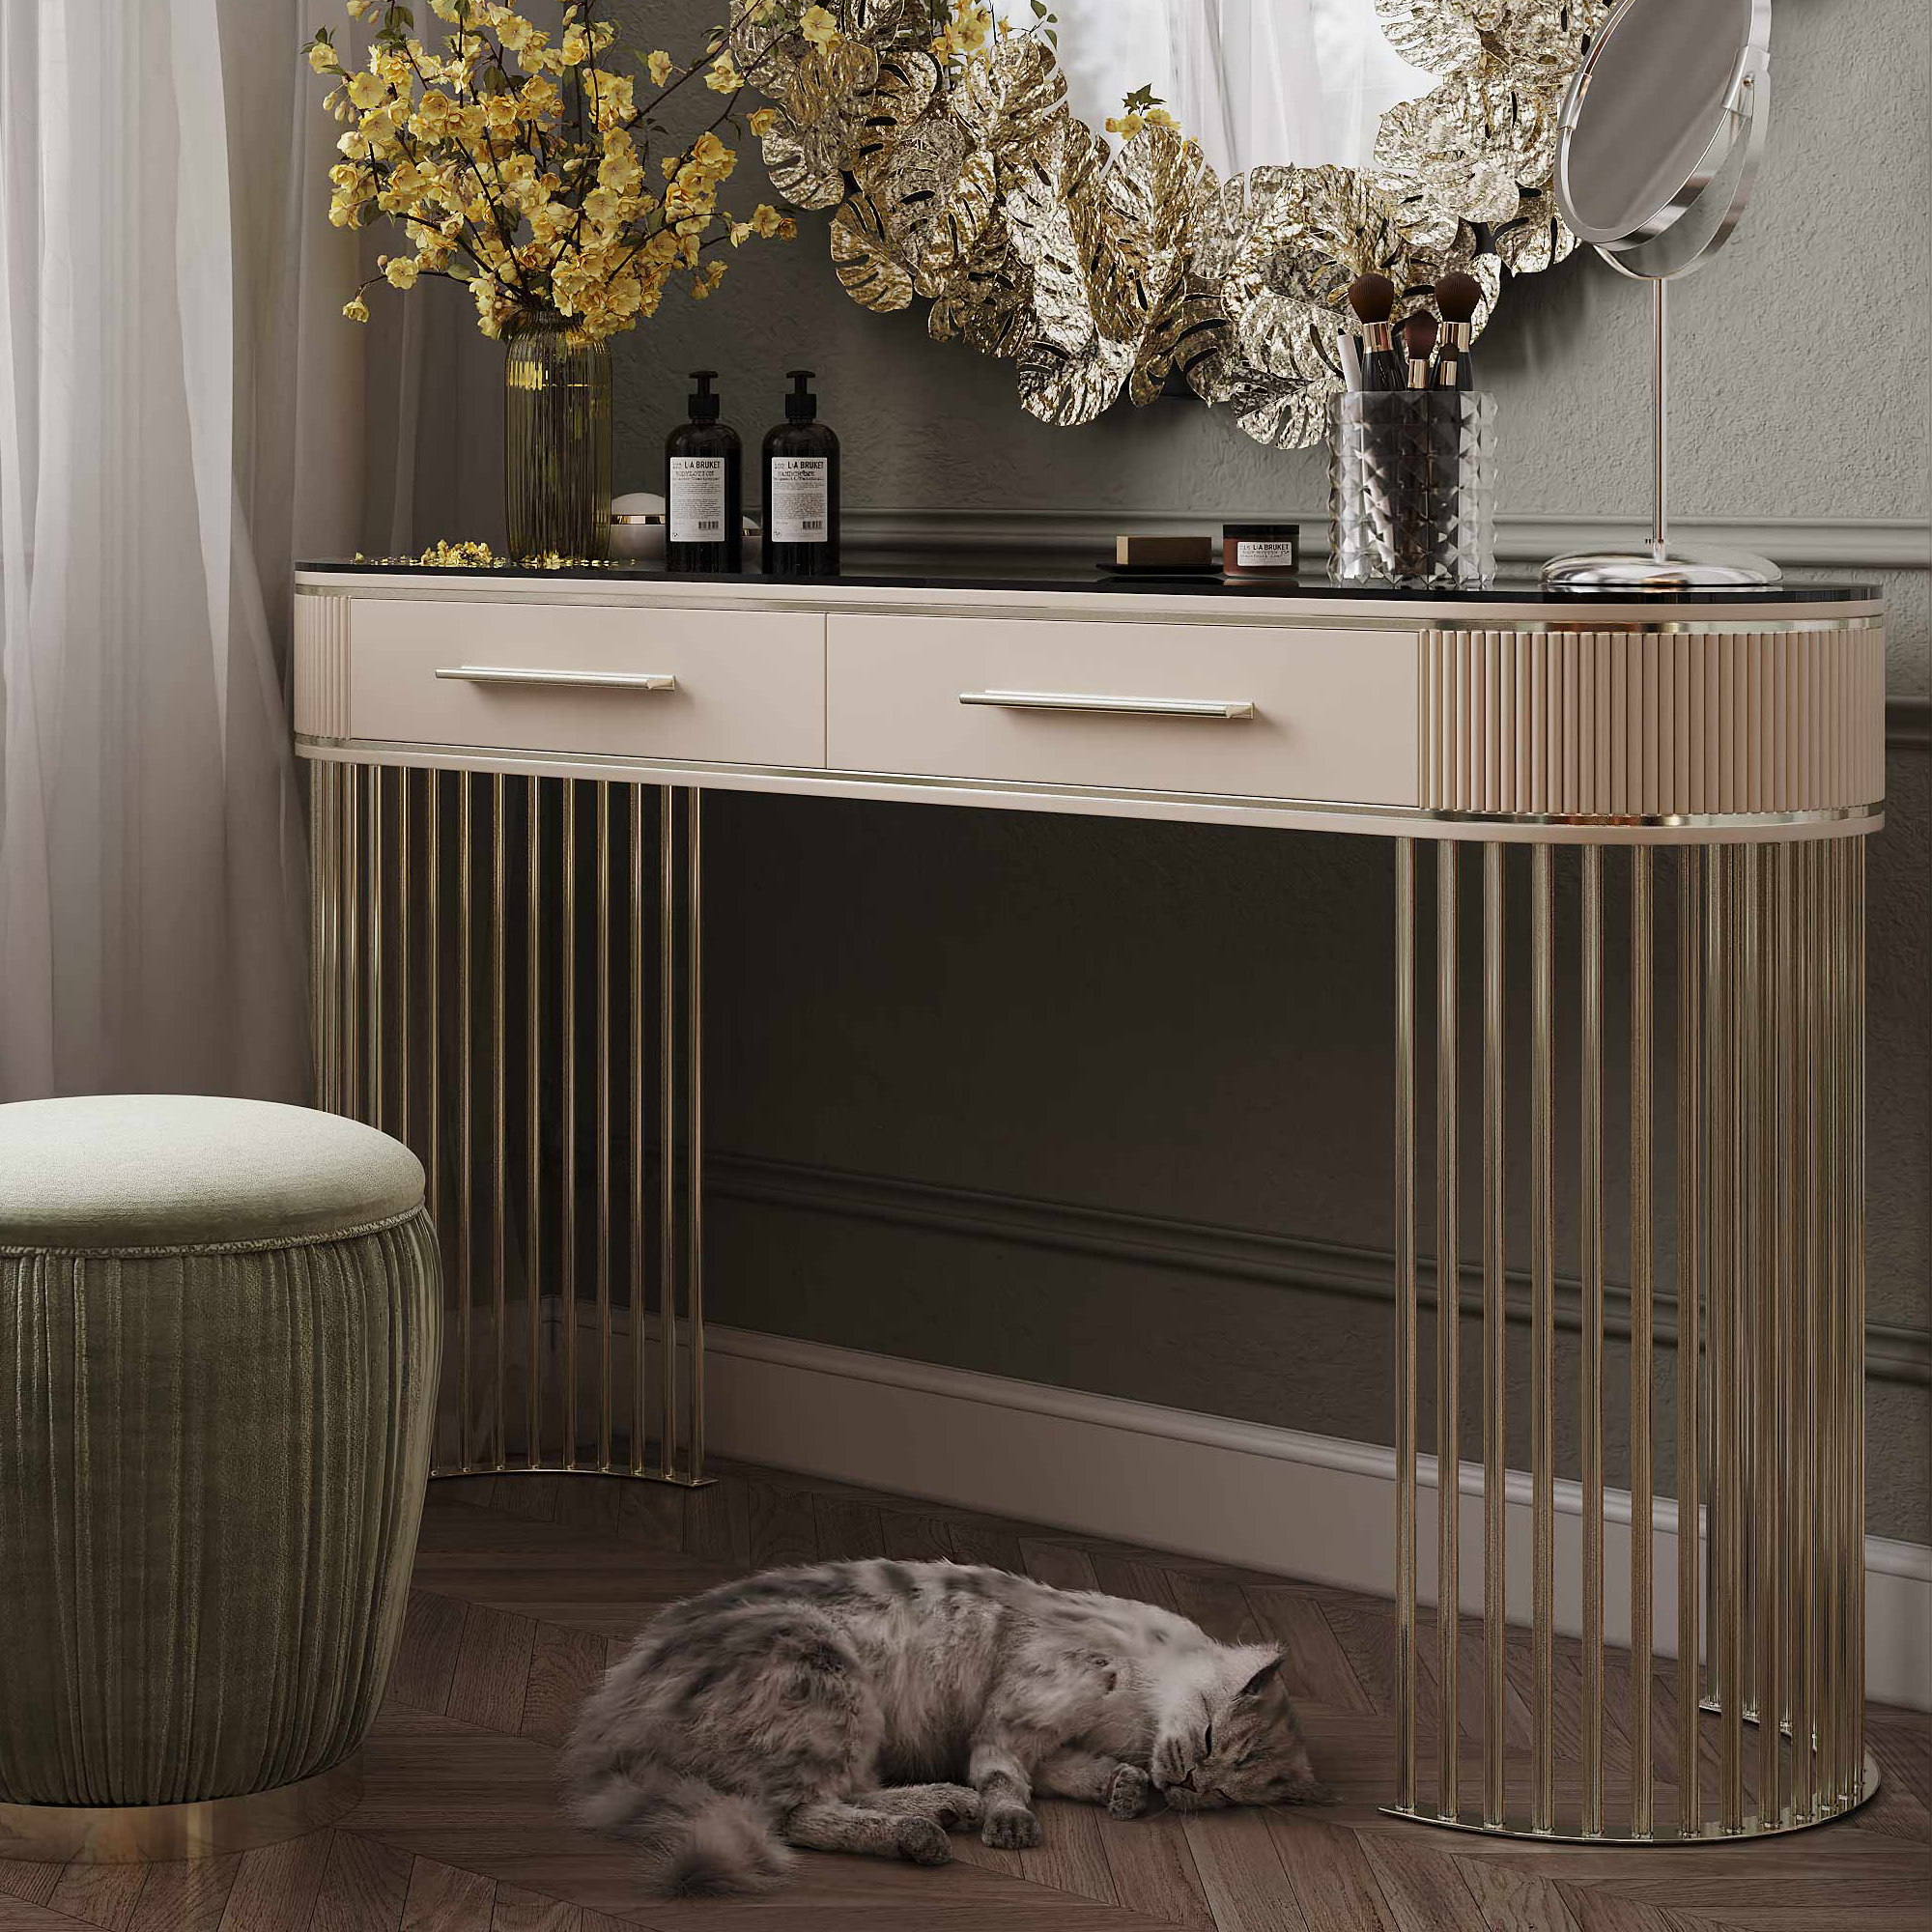 Built-In Dressing Table Ideas: How to Create the Ideal Vanity Table -  Melanie Jade Design